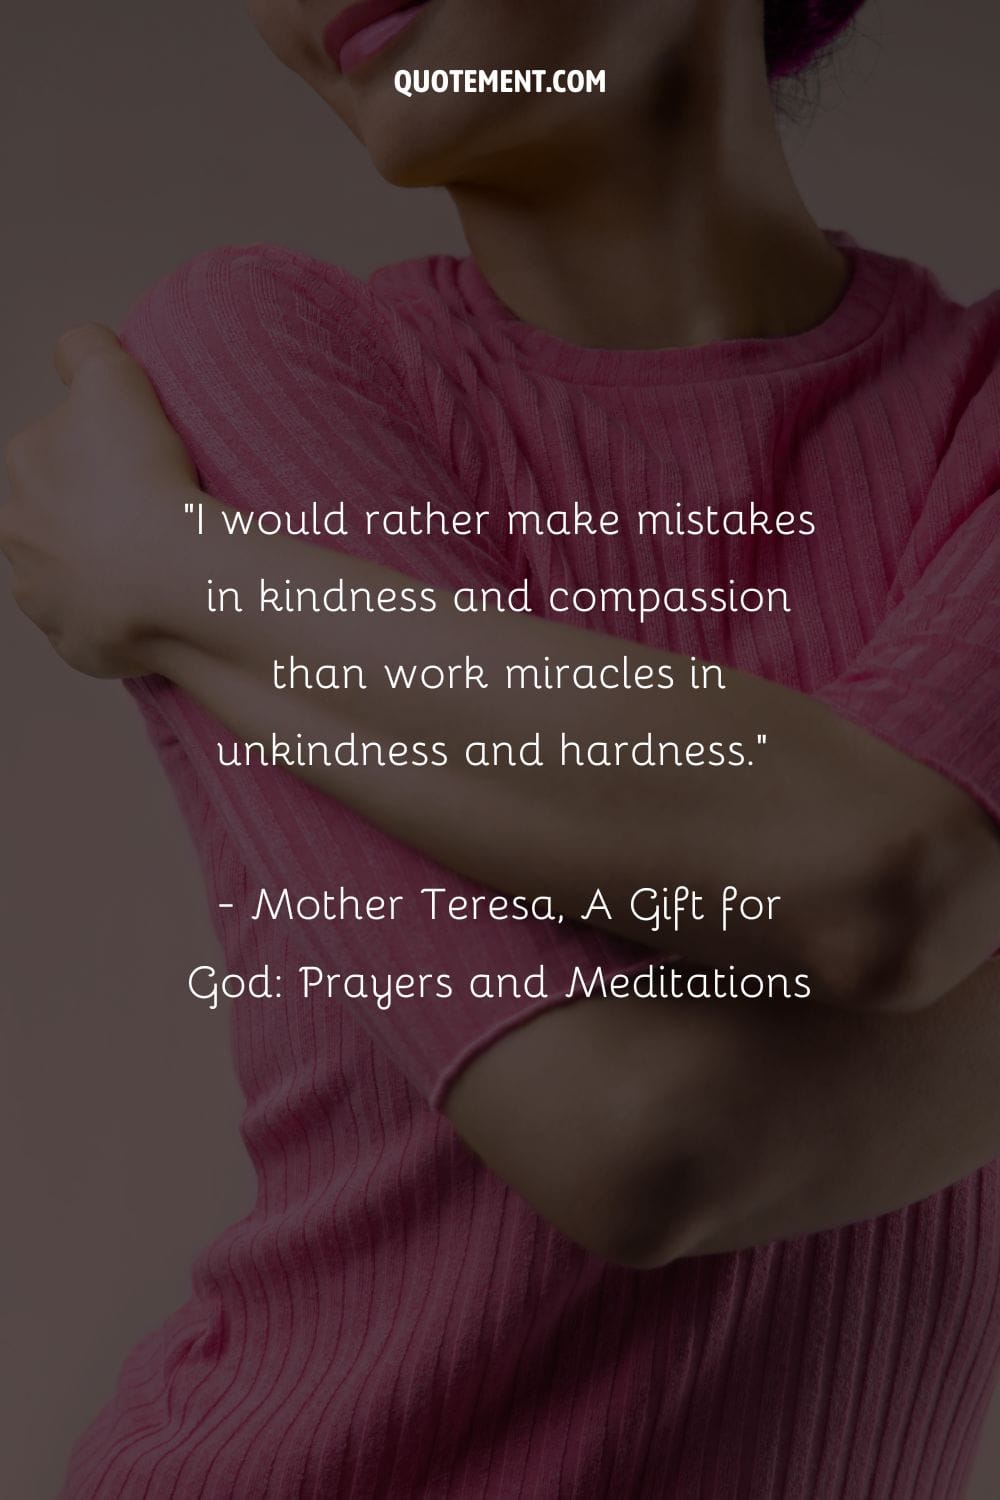 I would rather make mistakes in kindness and compassion than work miracles in unkindness and hardness